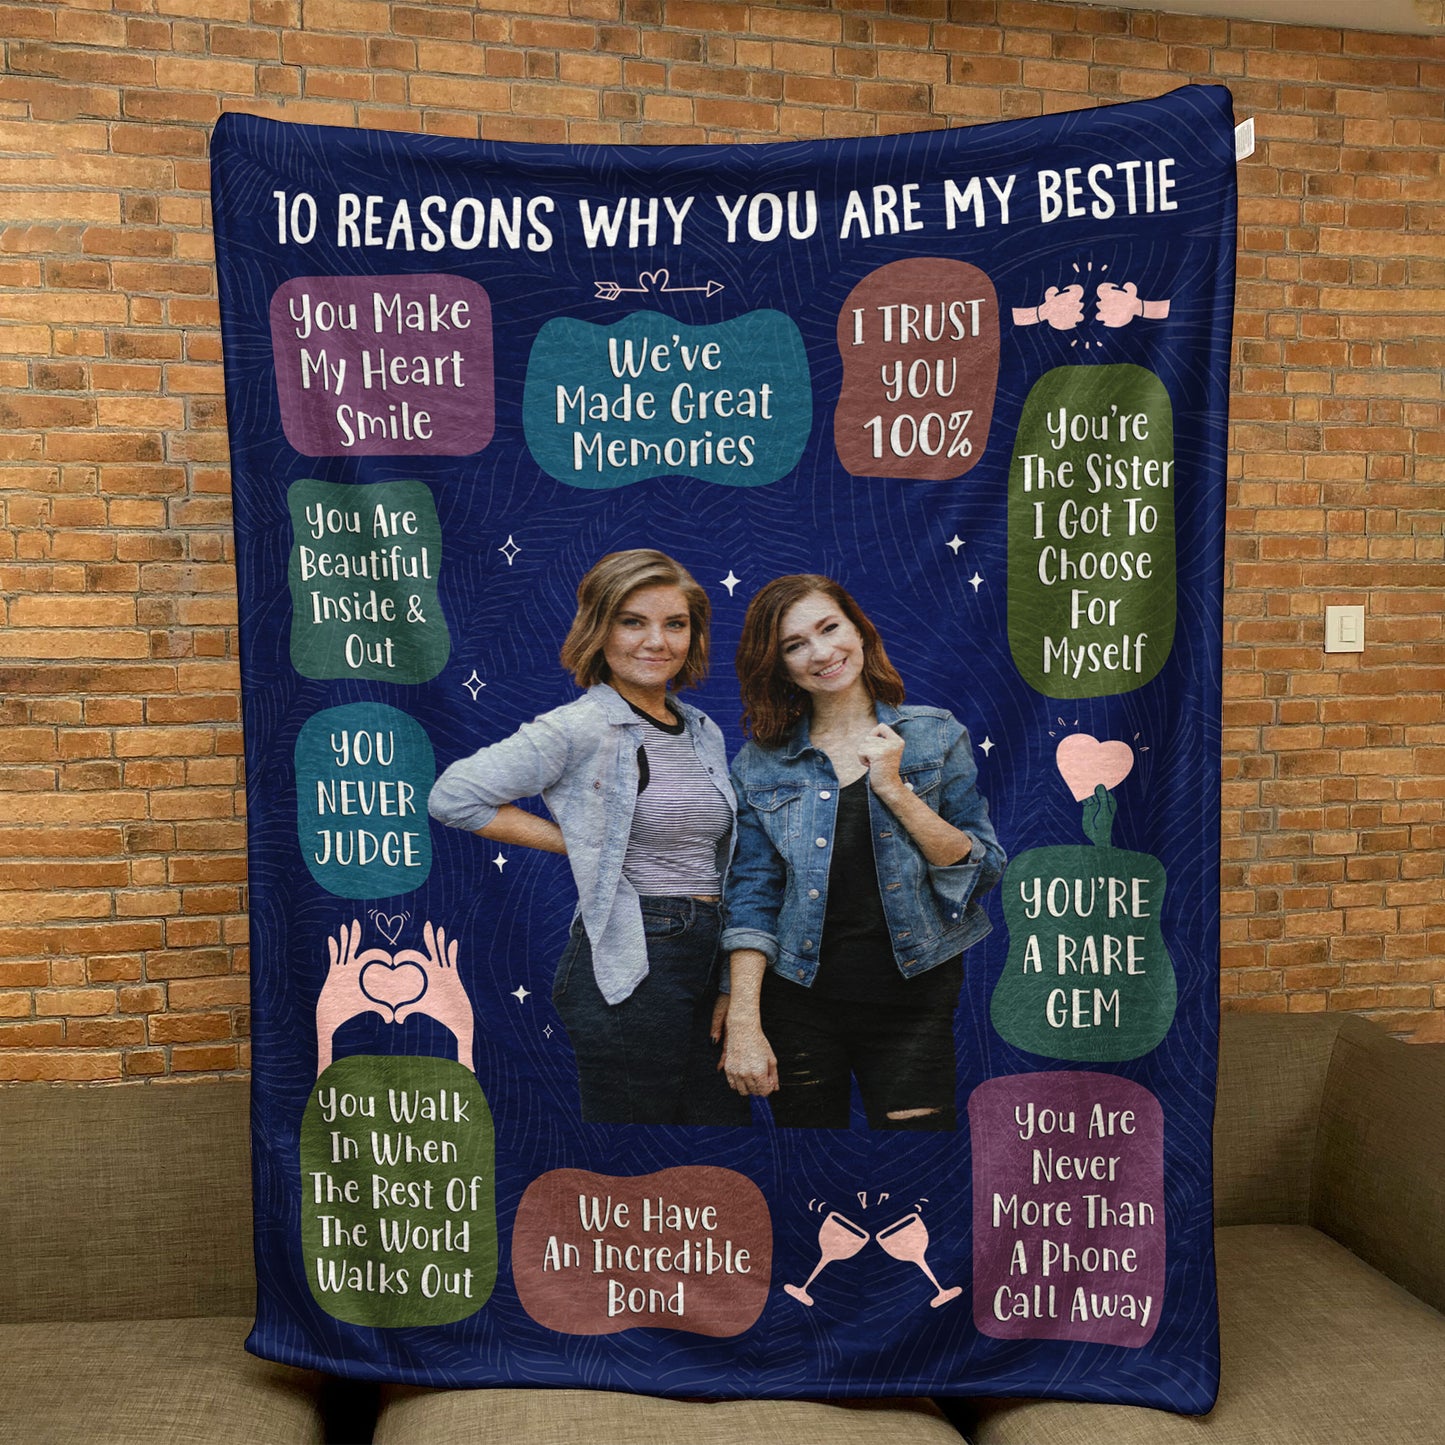 Reasons Why You Are My Bestie - Personalized Photo Blanket